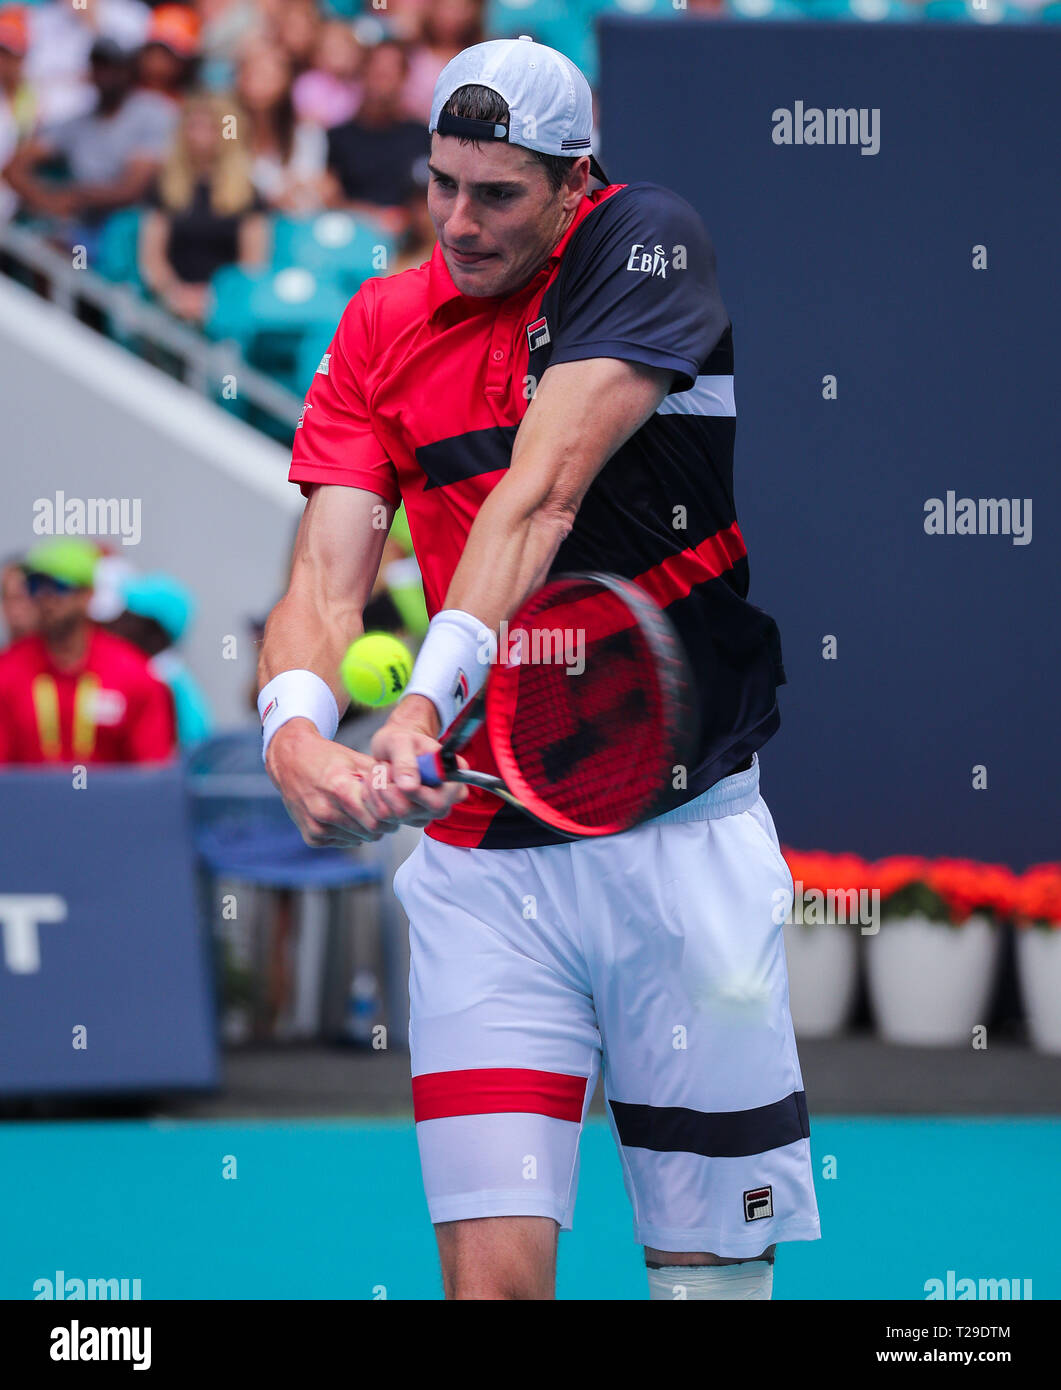 Miami Gardens, Florida, USA. 31st Mar, 2019. John Isner, of the United States, hits a backhand against Roger Federer, of Switzerland, in the Men's Singles final of the 2019 Miami Open Presented by Itau professional tennis tournament, played at the Hardrock Stadium in Miami Gardens, Florida, USA. Federer won 6-1, 6-4. Mario Houben/CSM/Alamy Live News Stock Photo